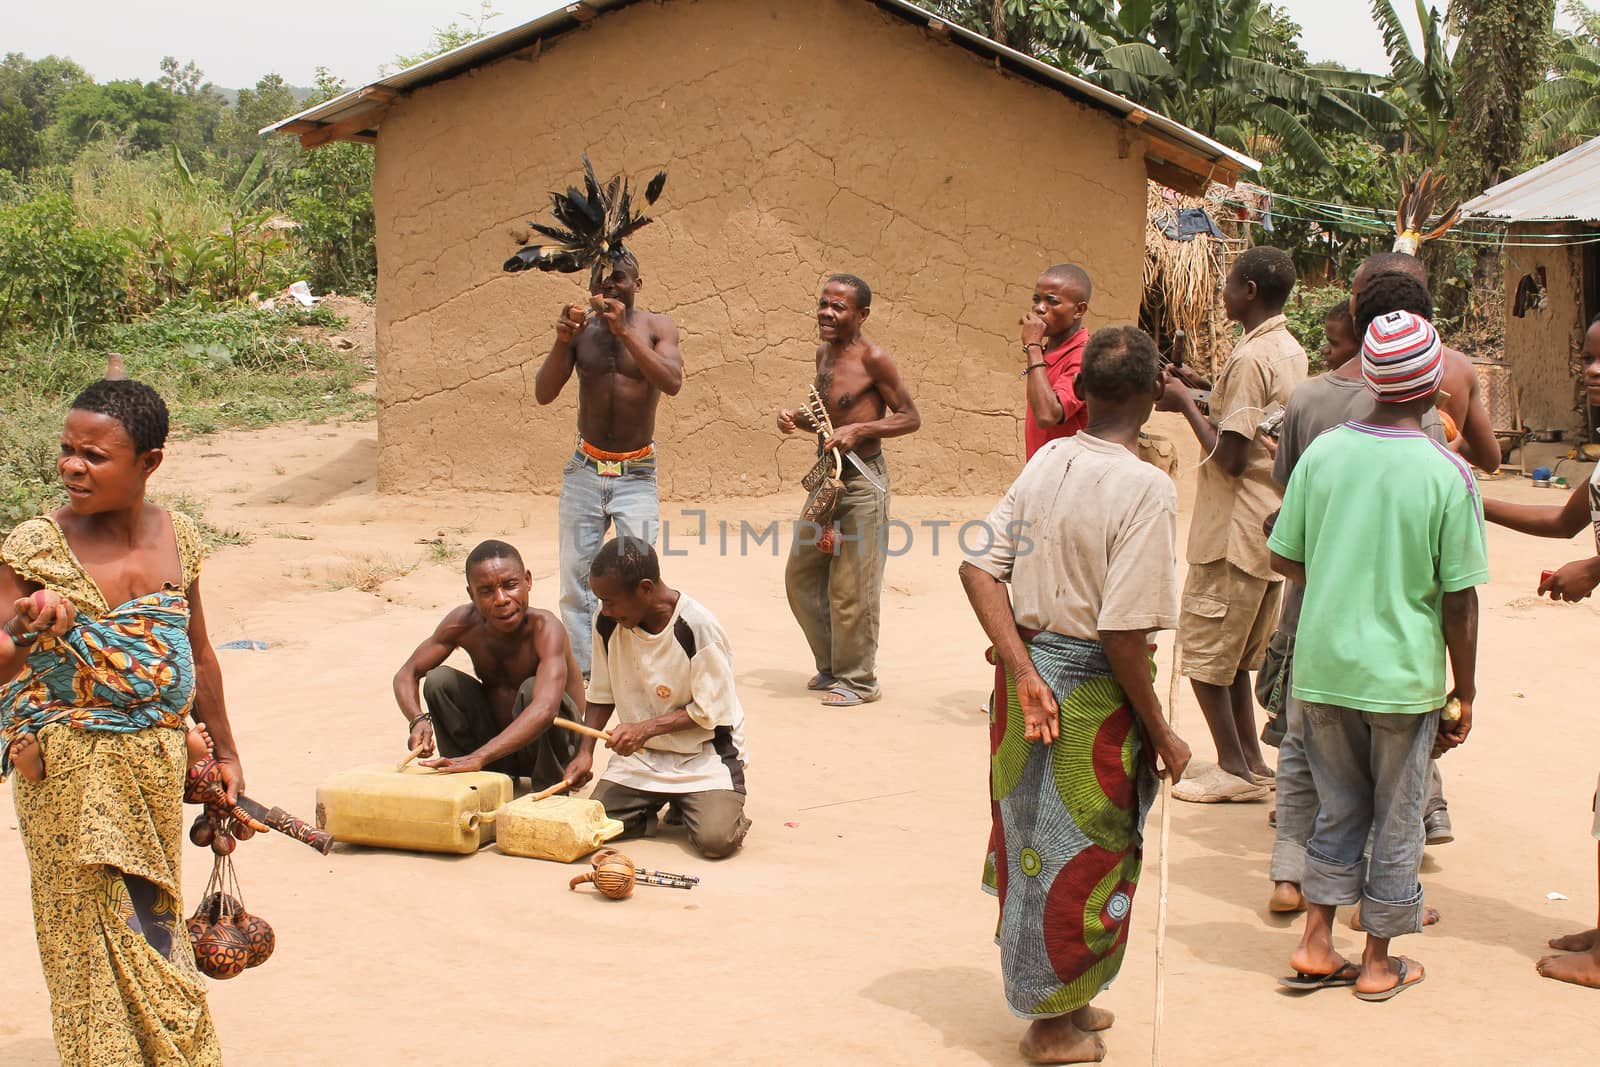 Uganda - 6 March: Pygmies are dancing in the village and play musical instruments 6 March 2012 in Uganda